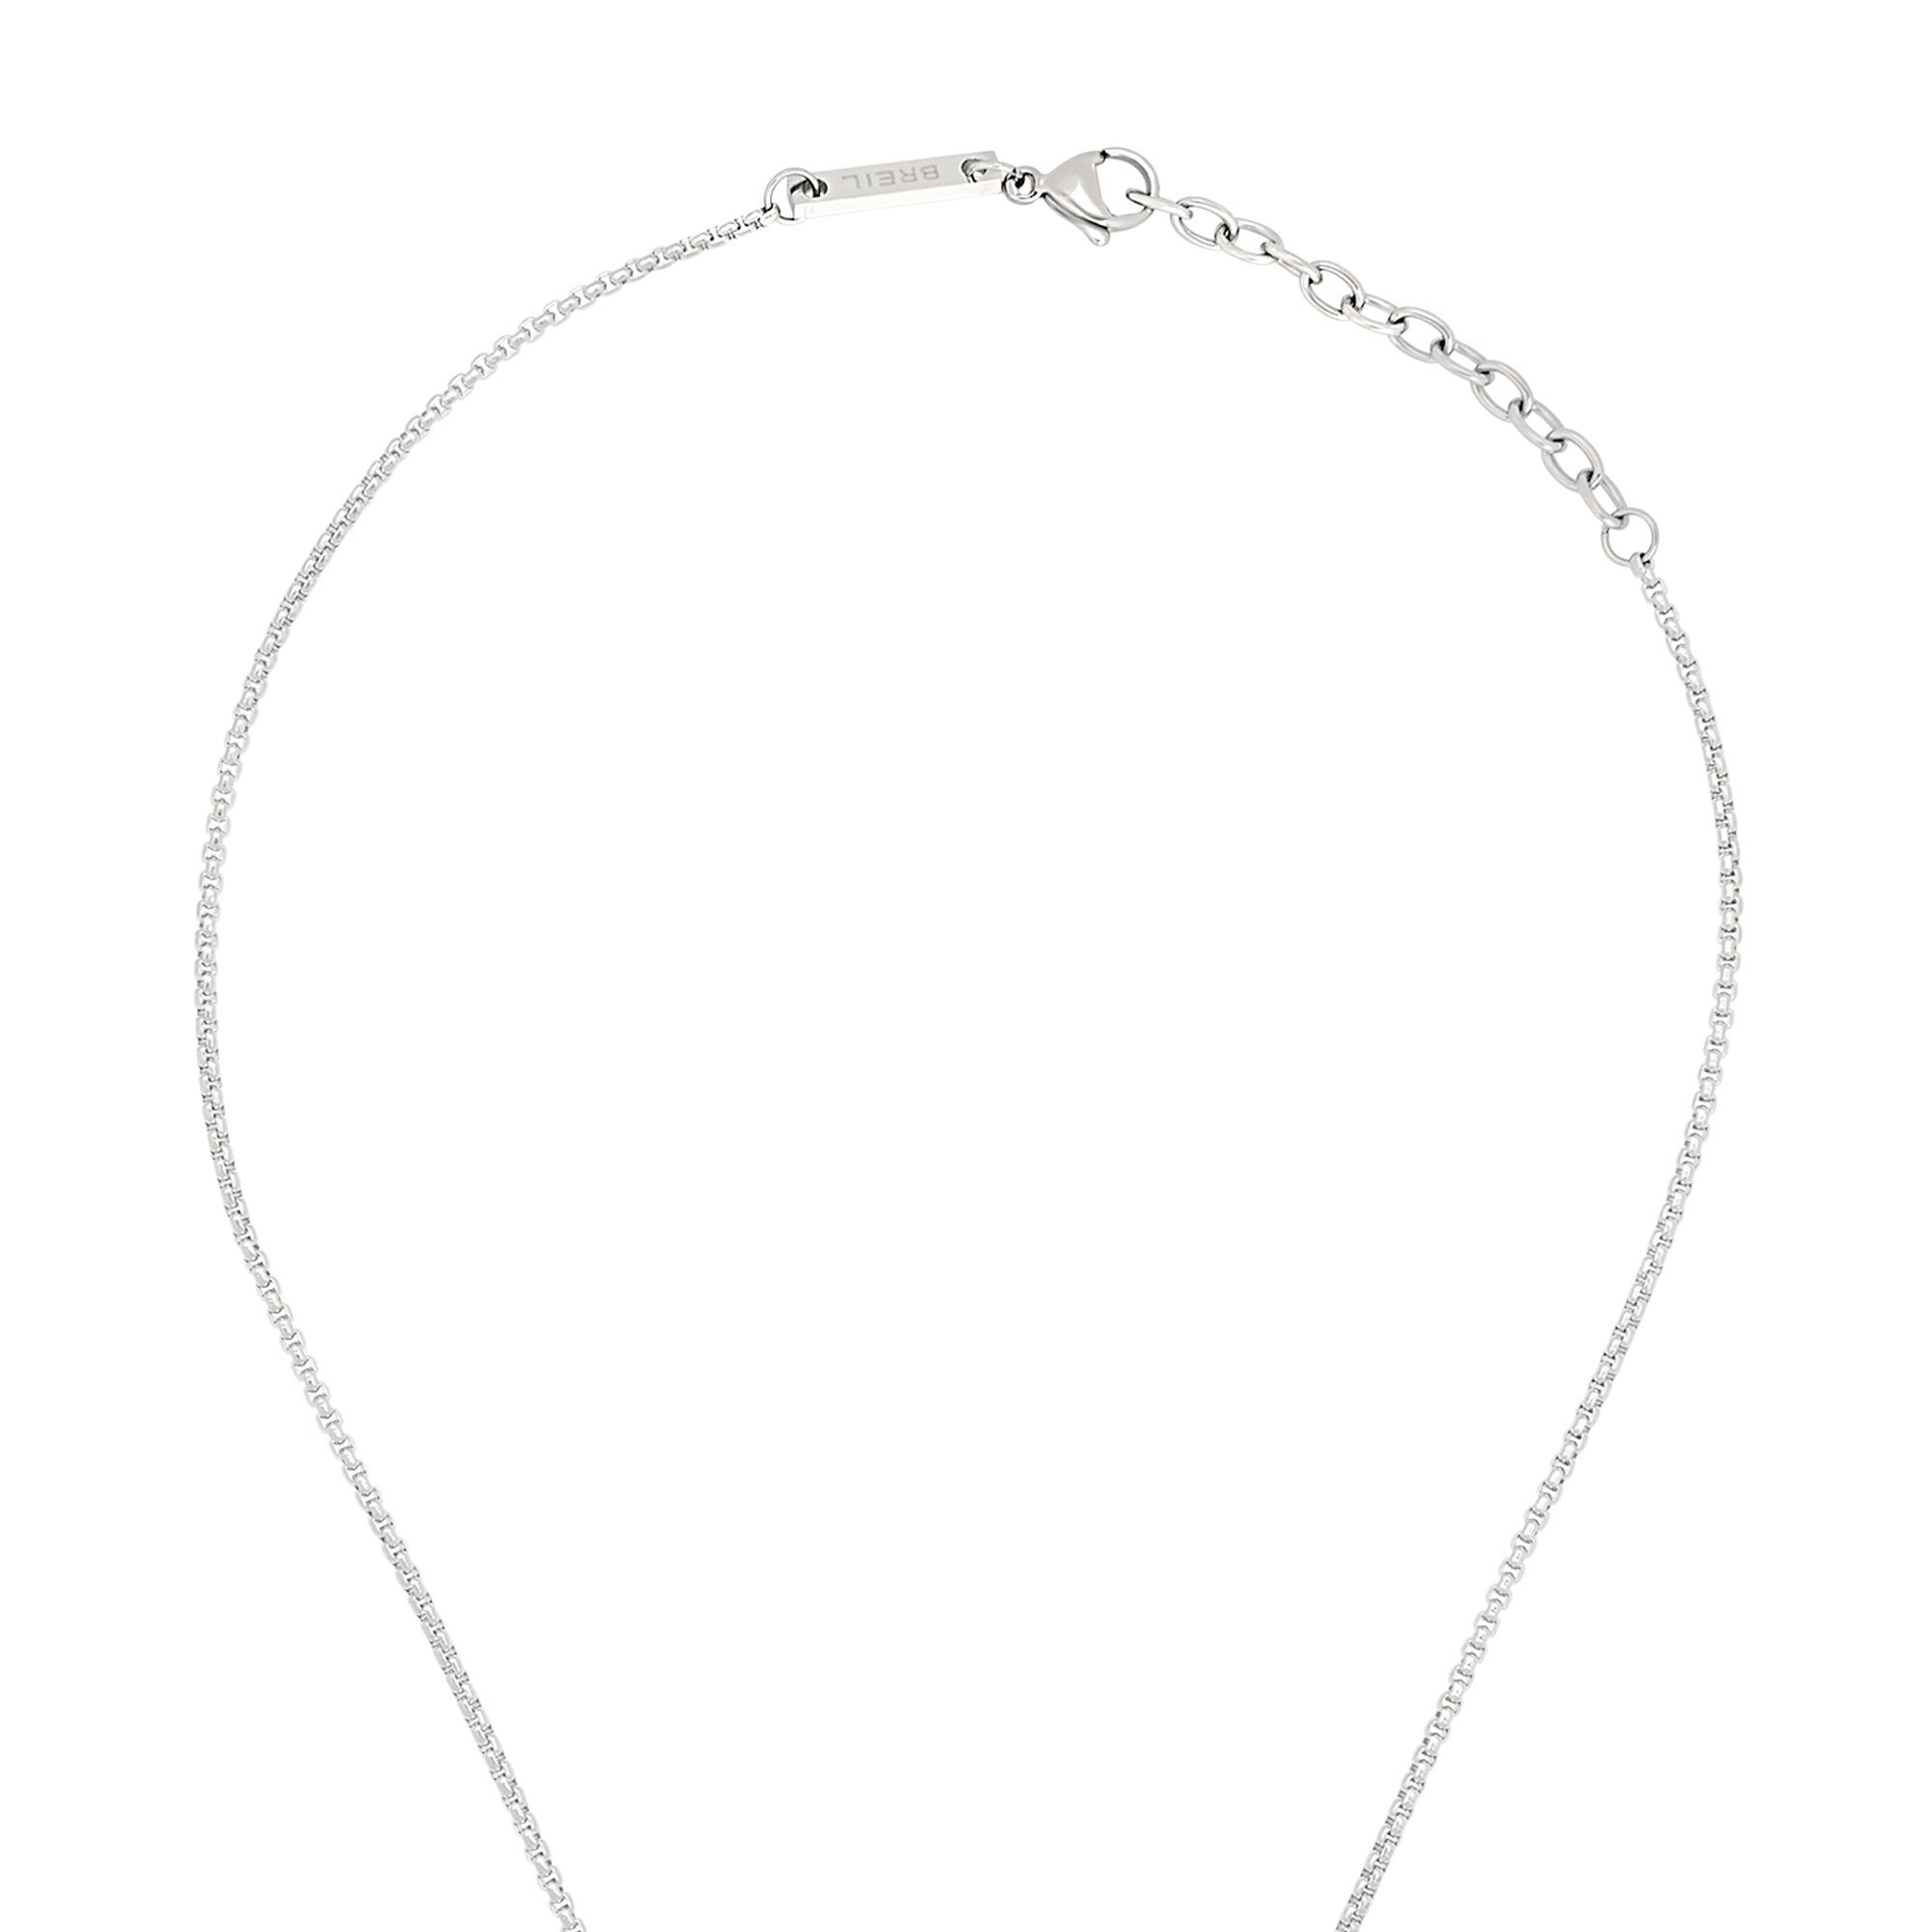 LIGHT ROW - STAINLESS STEEL NECKLACE WITH CUBIC ZIRCONIA - 3 - TJ3360 | Breil